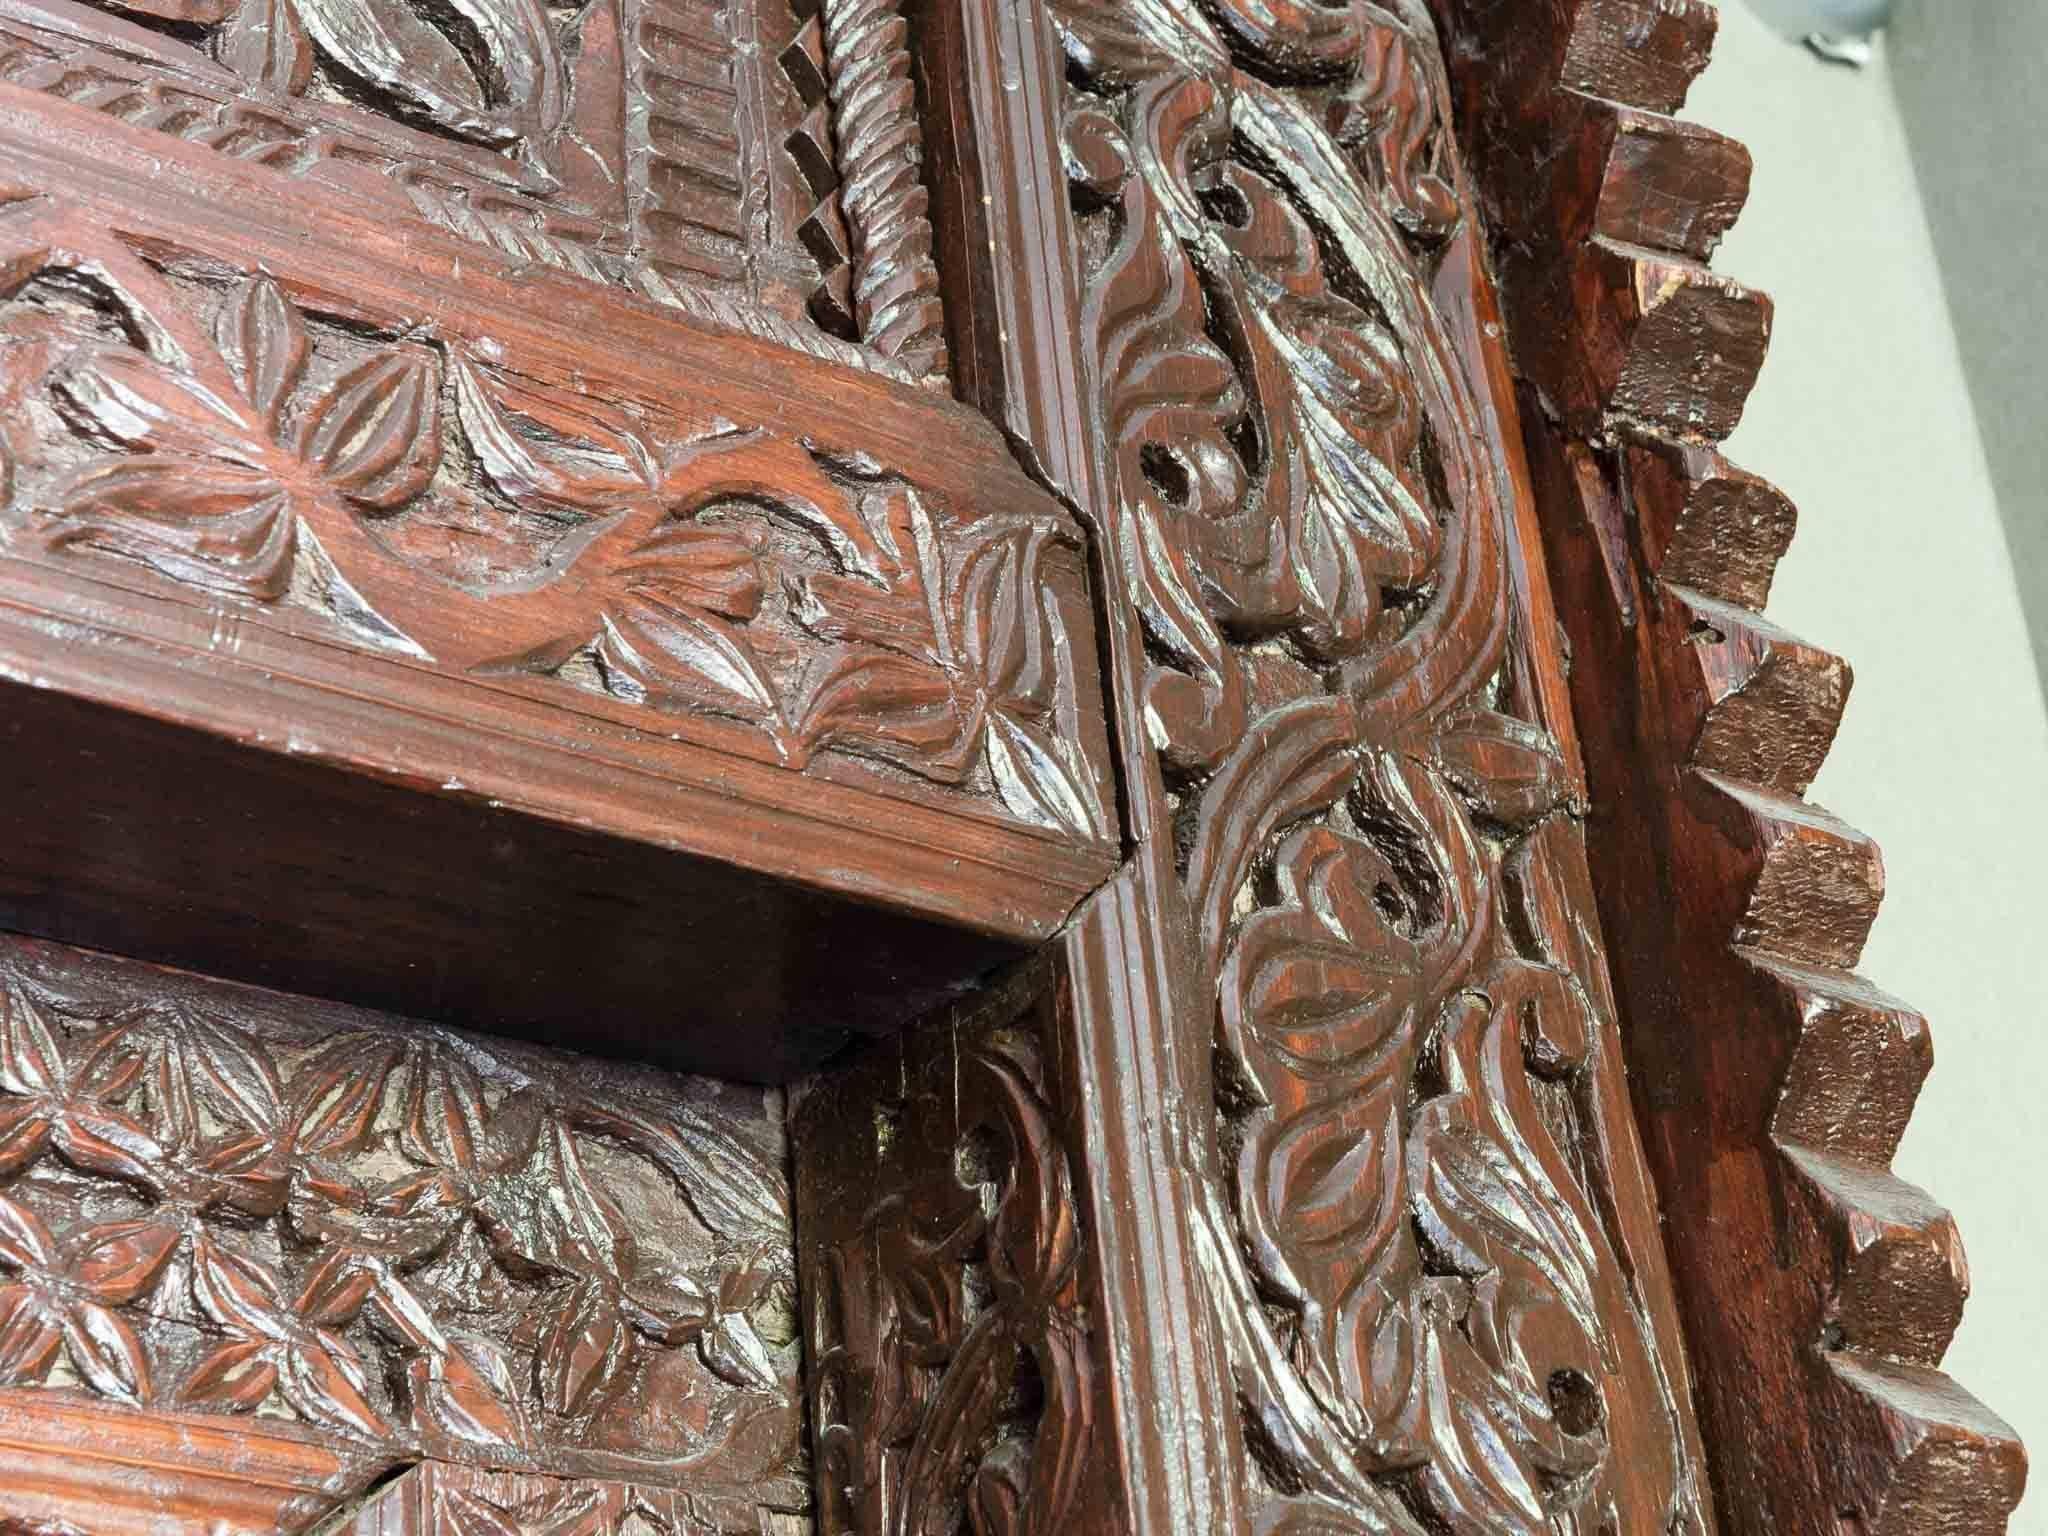 Antique Indian Ornately Carved Wooden Doors and Surrounding Frame 1